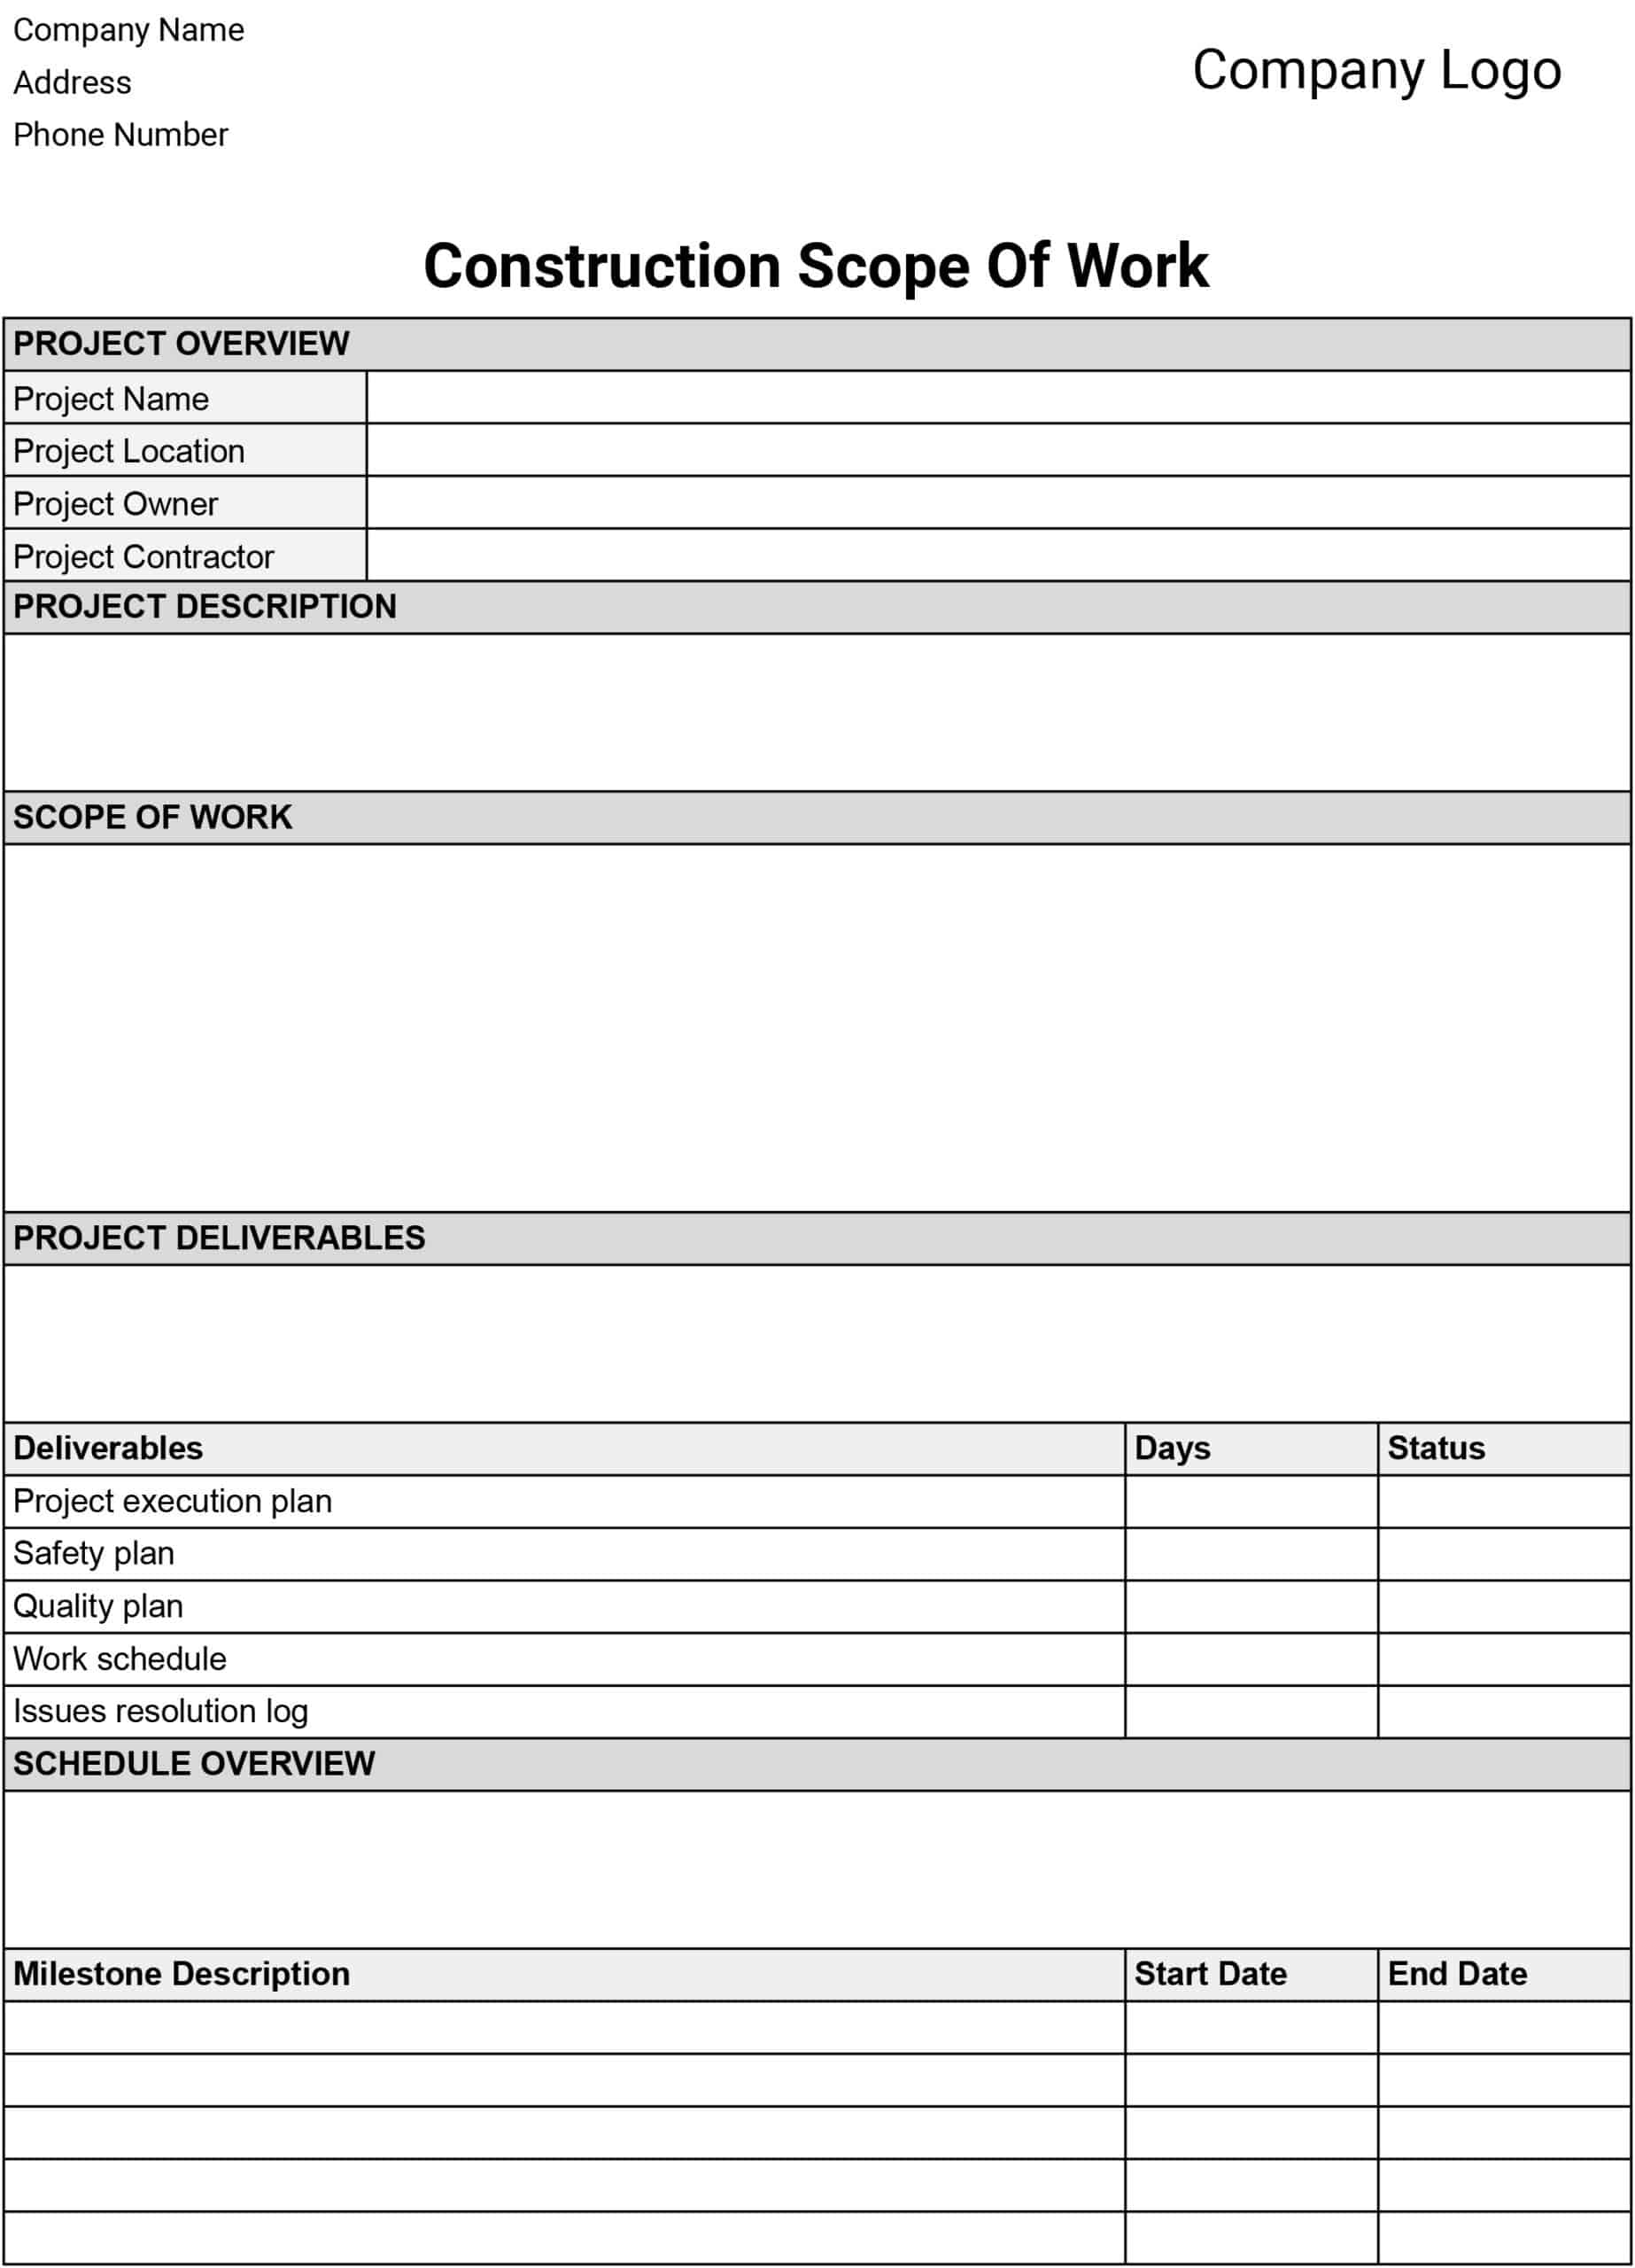 scope-of-work-construction-templates-download-print-for-free